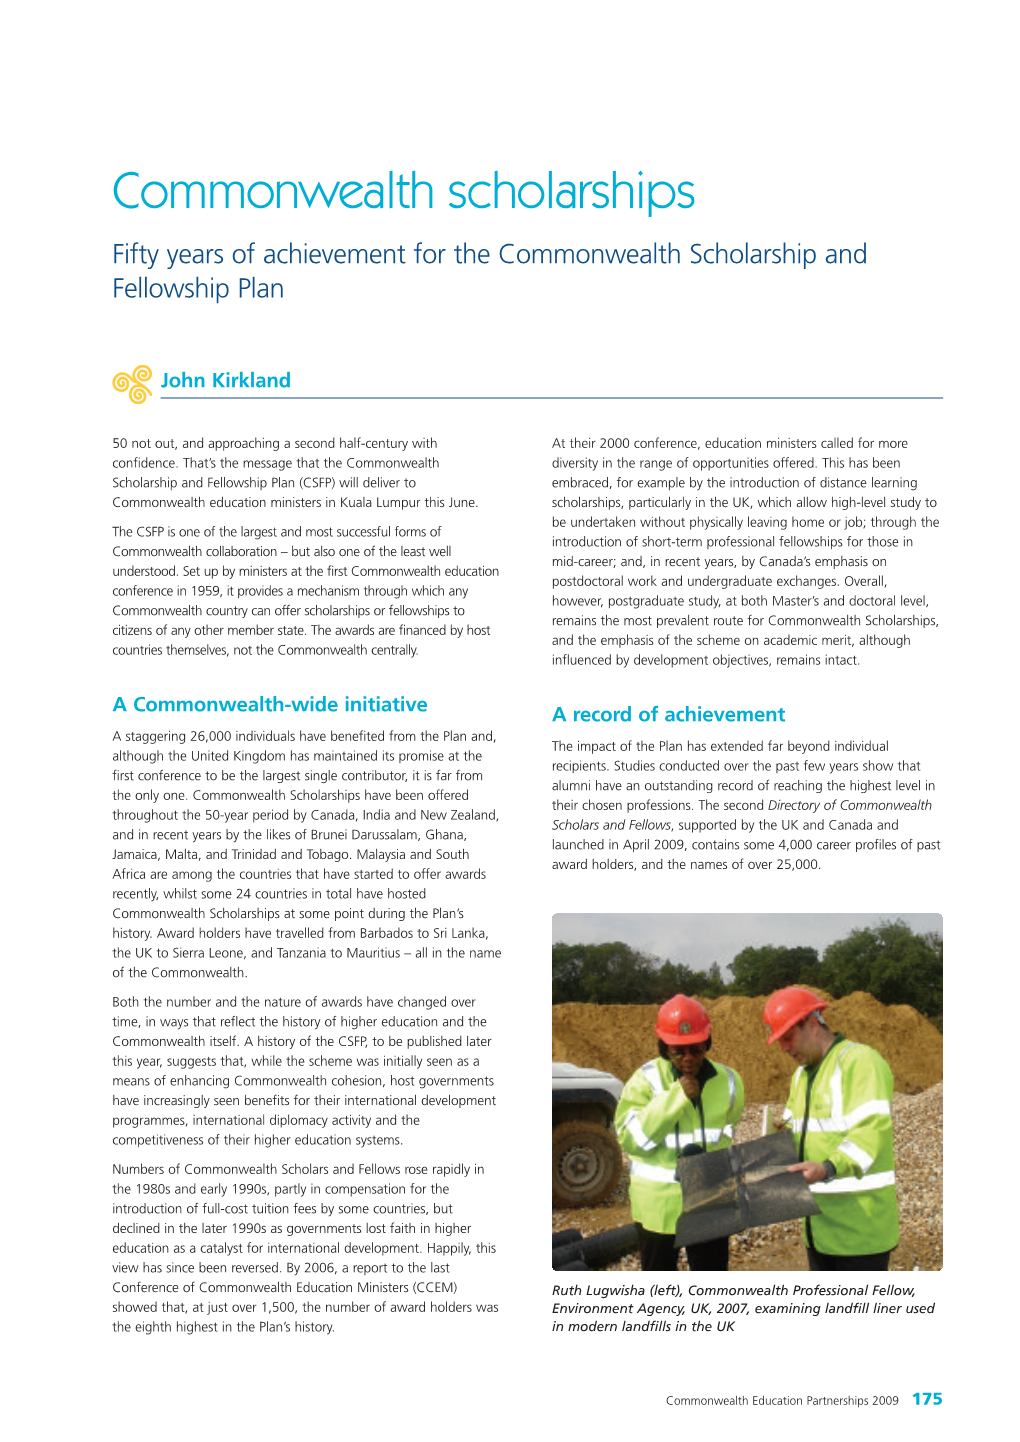 Commonwealth Scholarships Fifty Years of Achievement for the Commonwealth Scholarship and Fellowship Plan